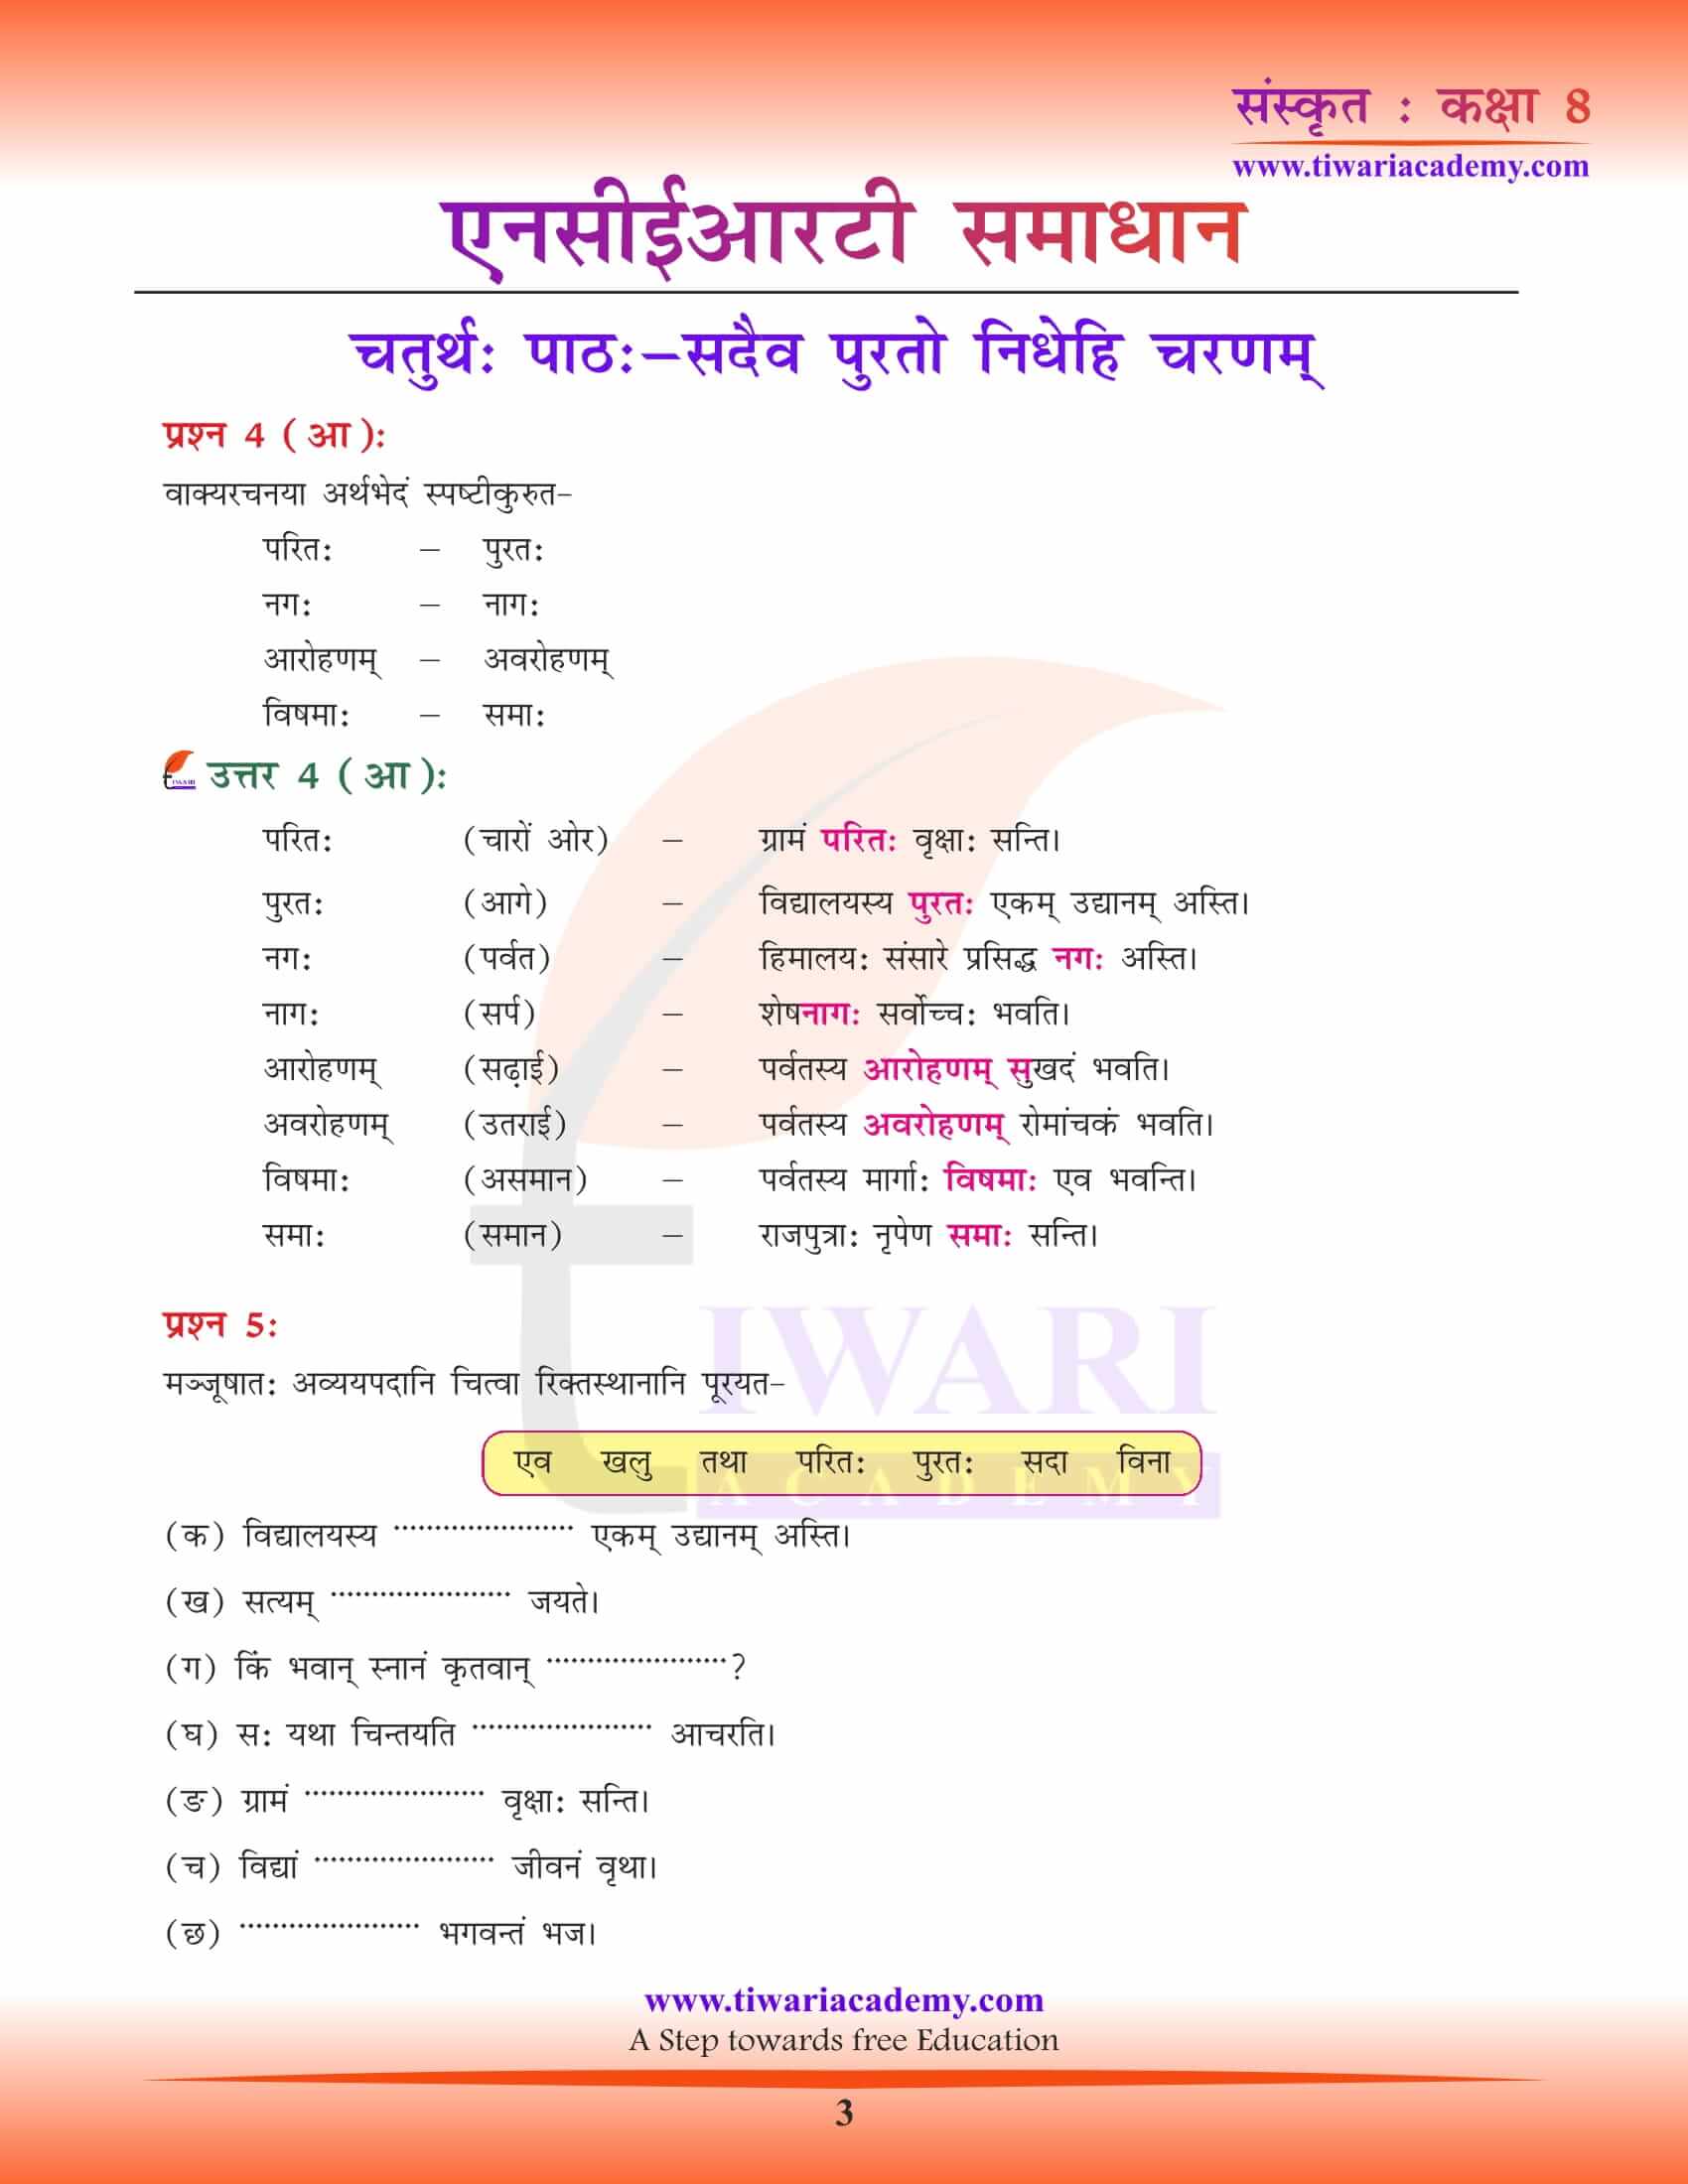 NCERT Solutions for class 8 Sanskrit Chapter 4 answers